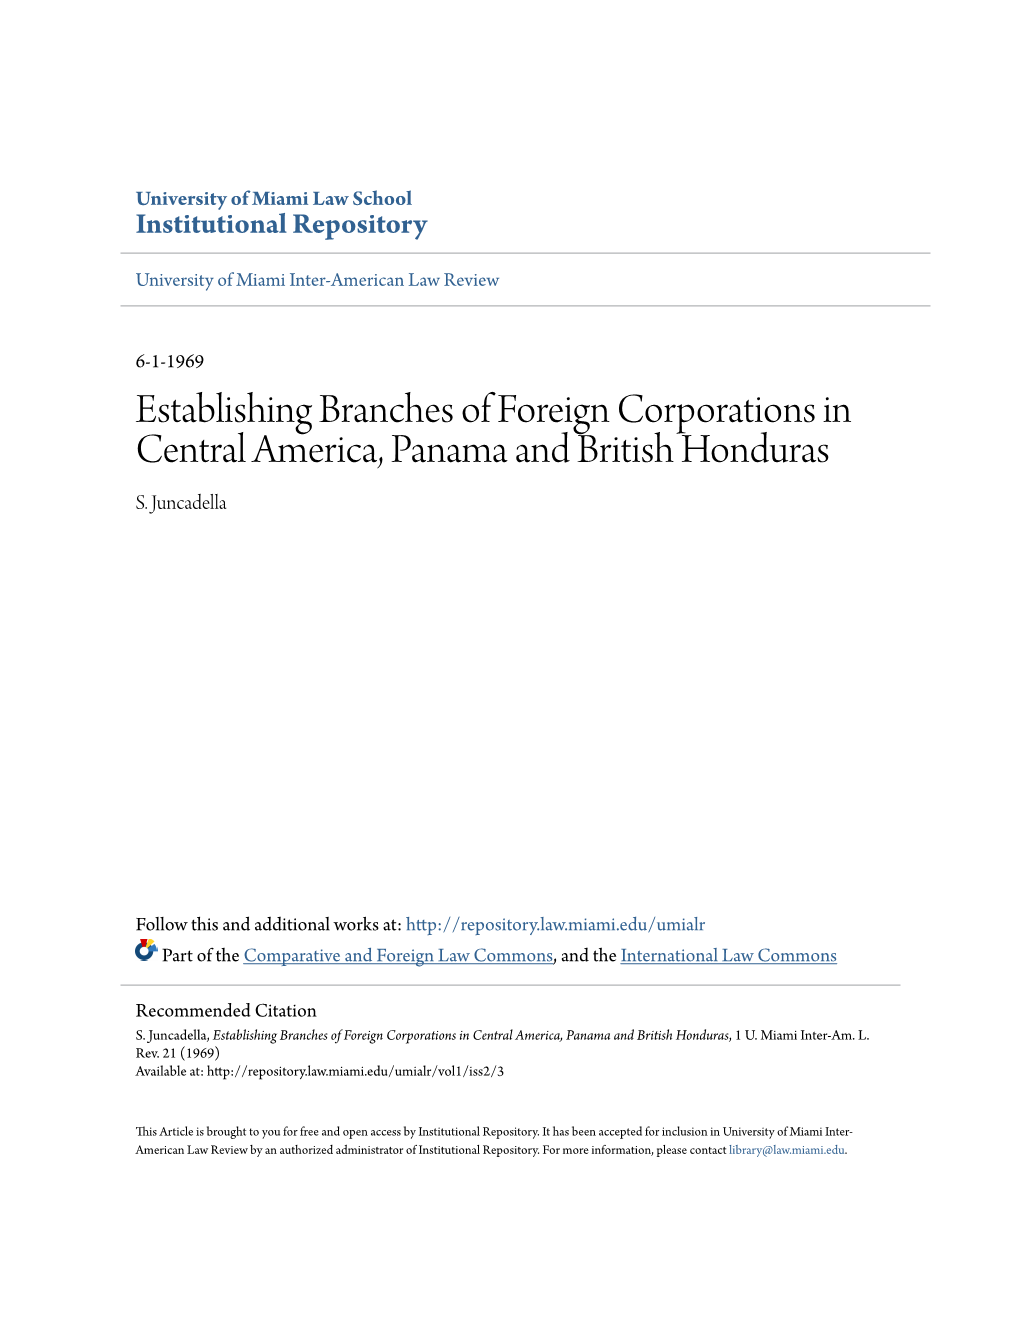 Establishing Branches of Foreign Corporations in Central America, Panama and British Honduras S